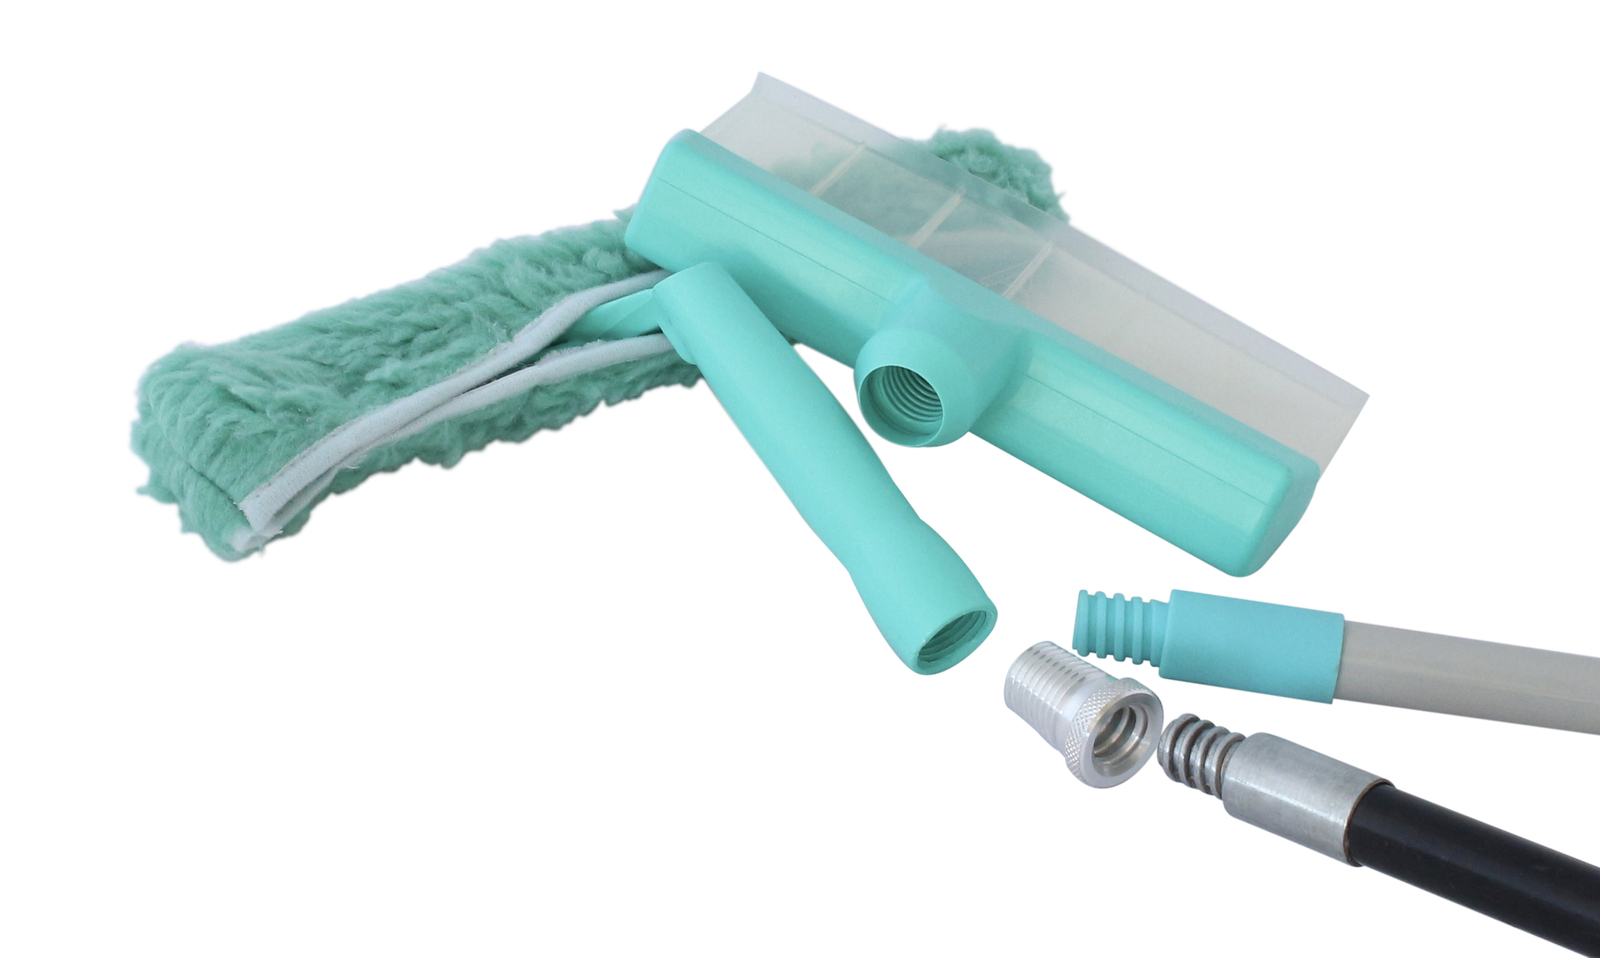 Aqua Blade 30cm with Pre-Washer, Thread Adaptor & Rotation Joint